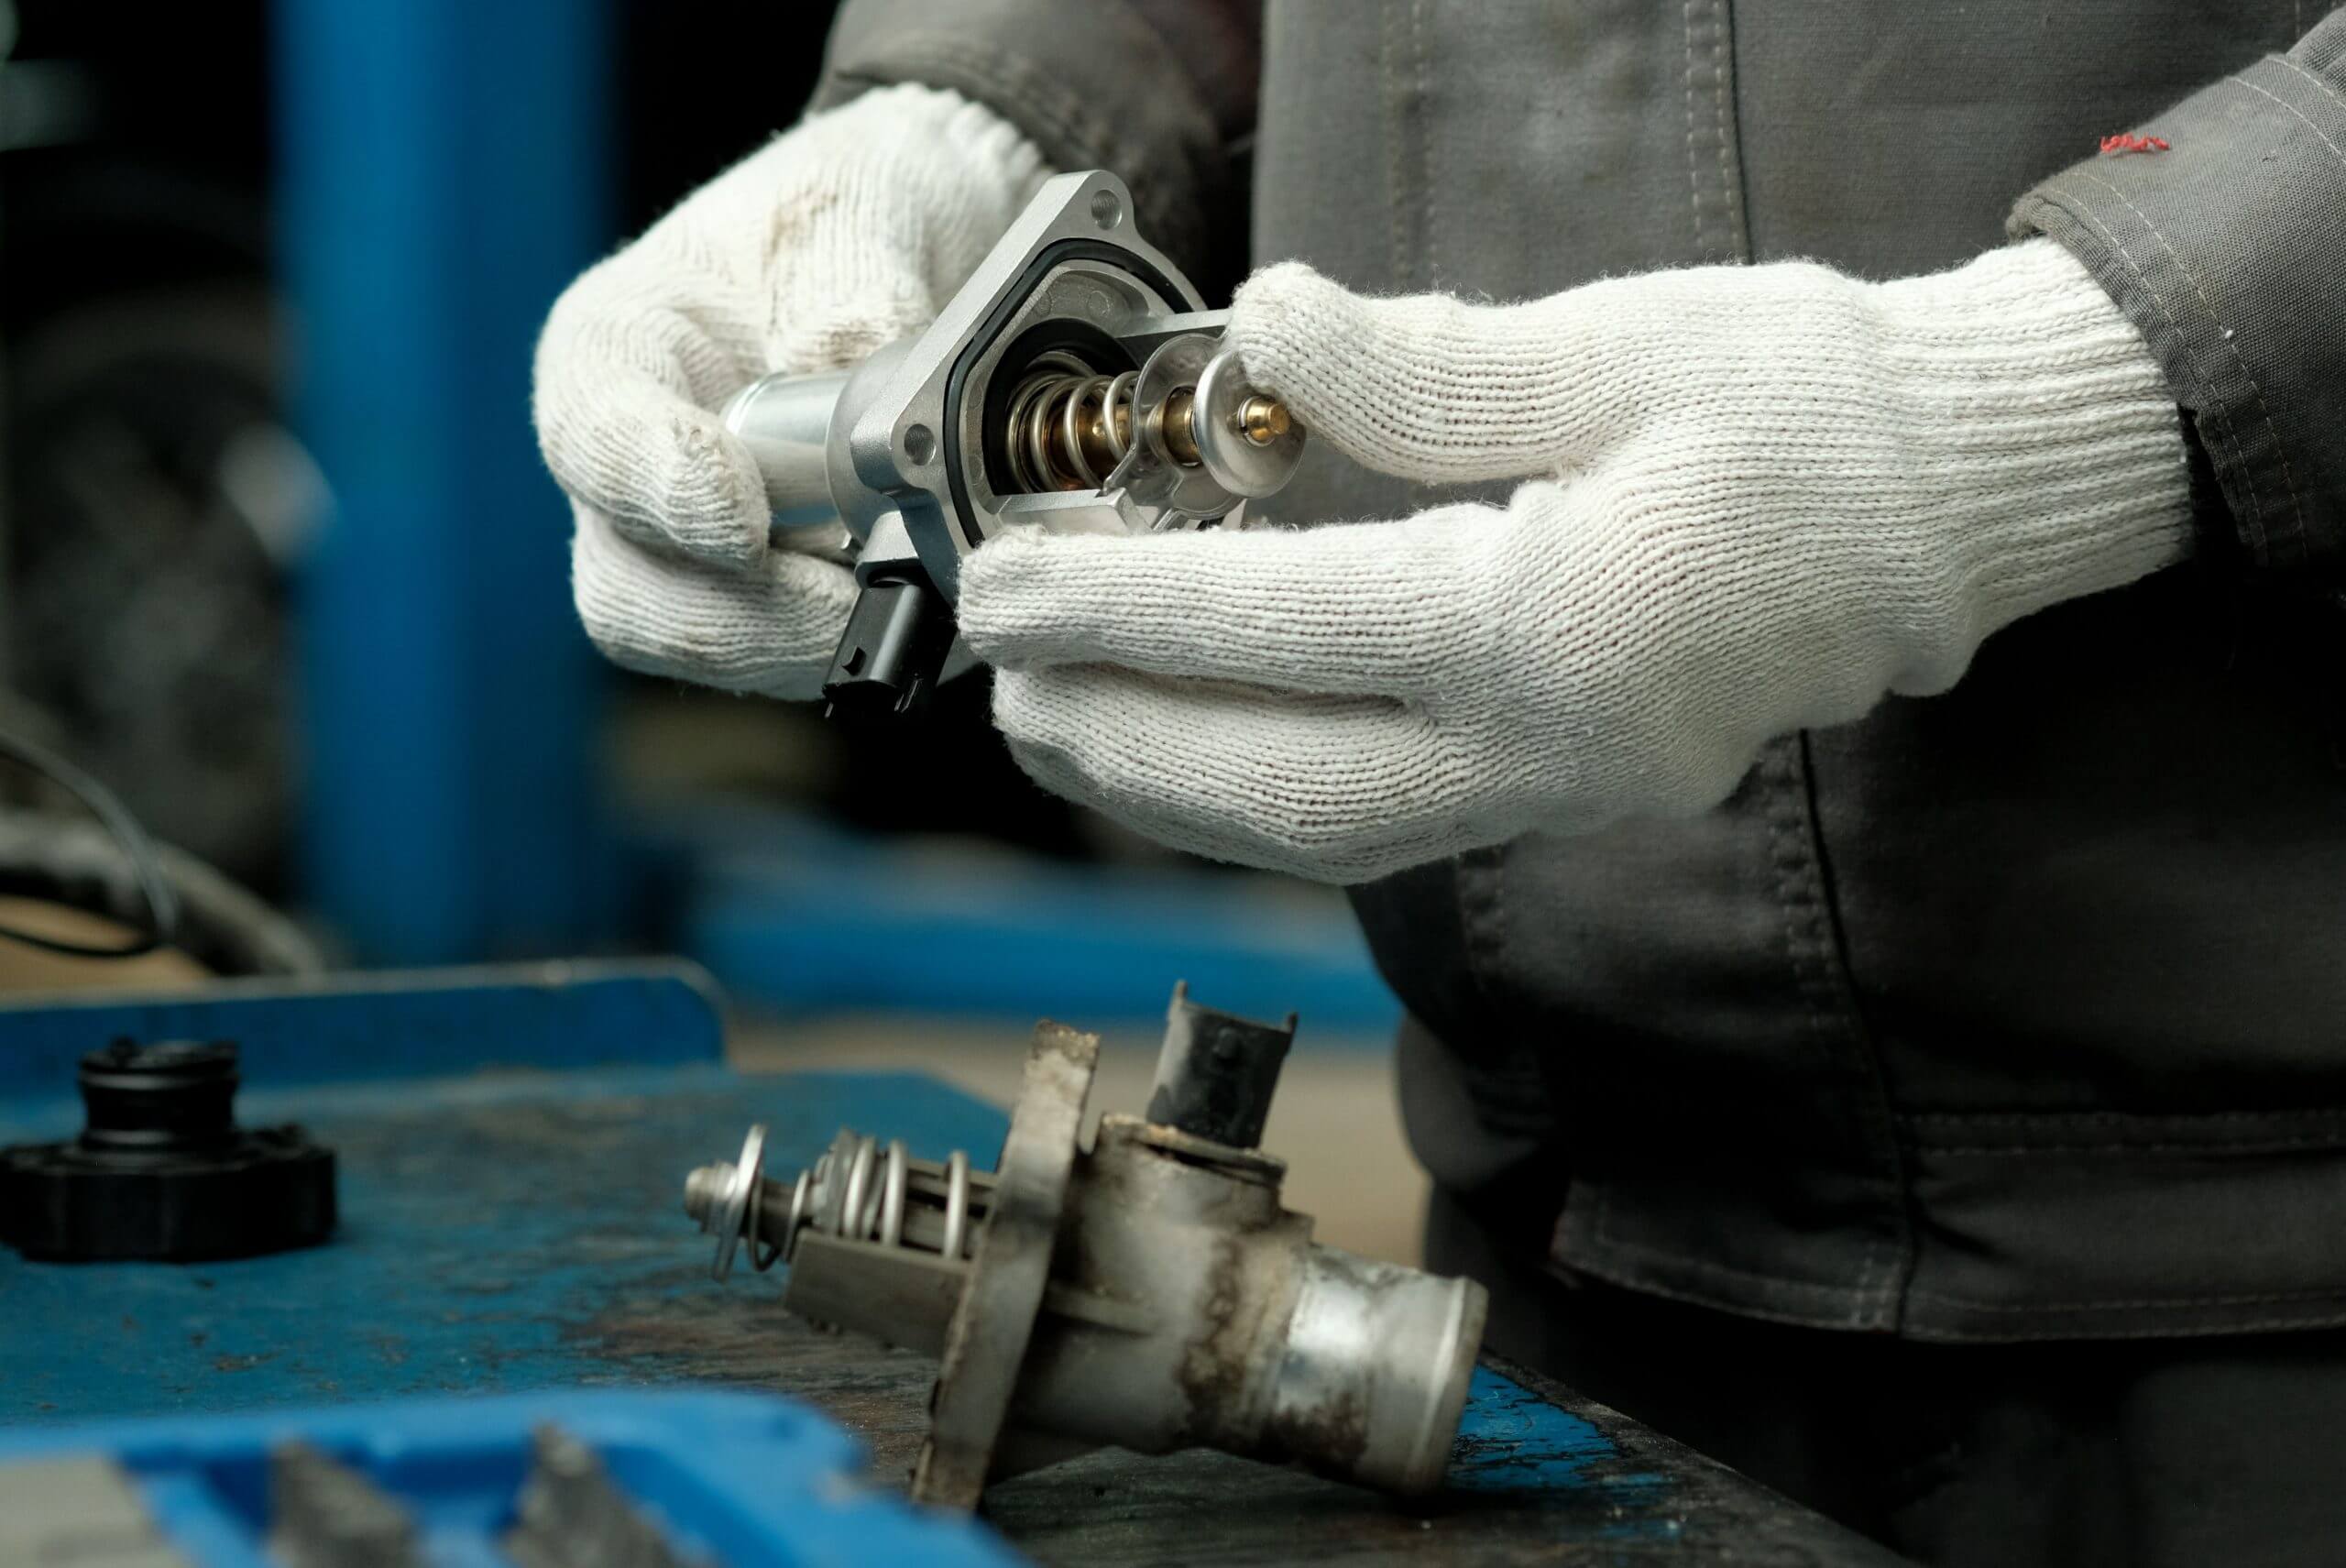 Spare parts. Thermostat for an automobile engine. Close-up. A mechanic inspects a new thermostat when replacing a faulty thermostat. Maintenance and repair in a car service.